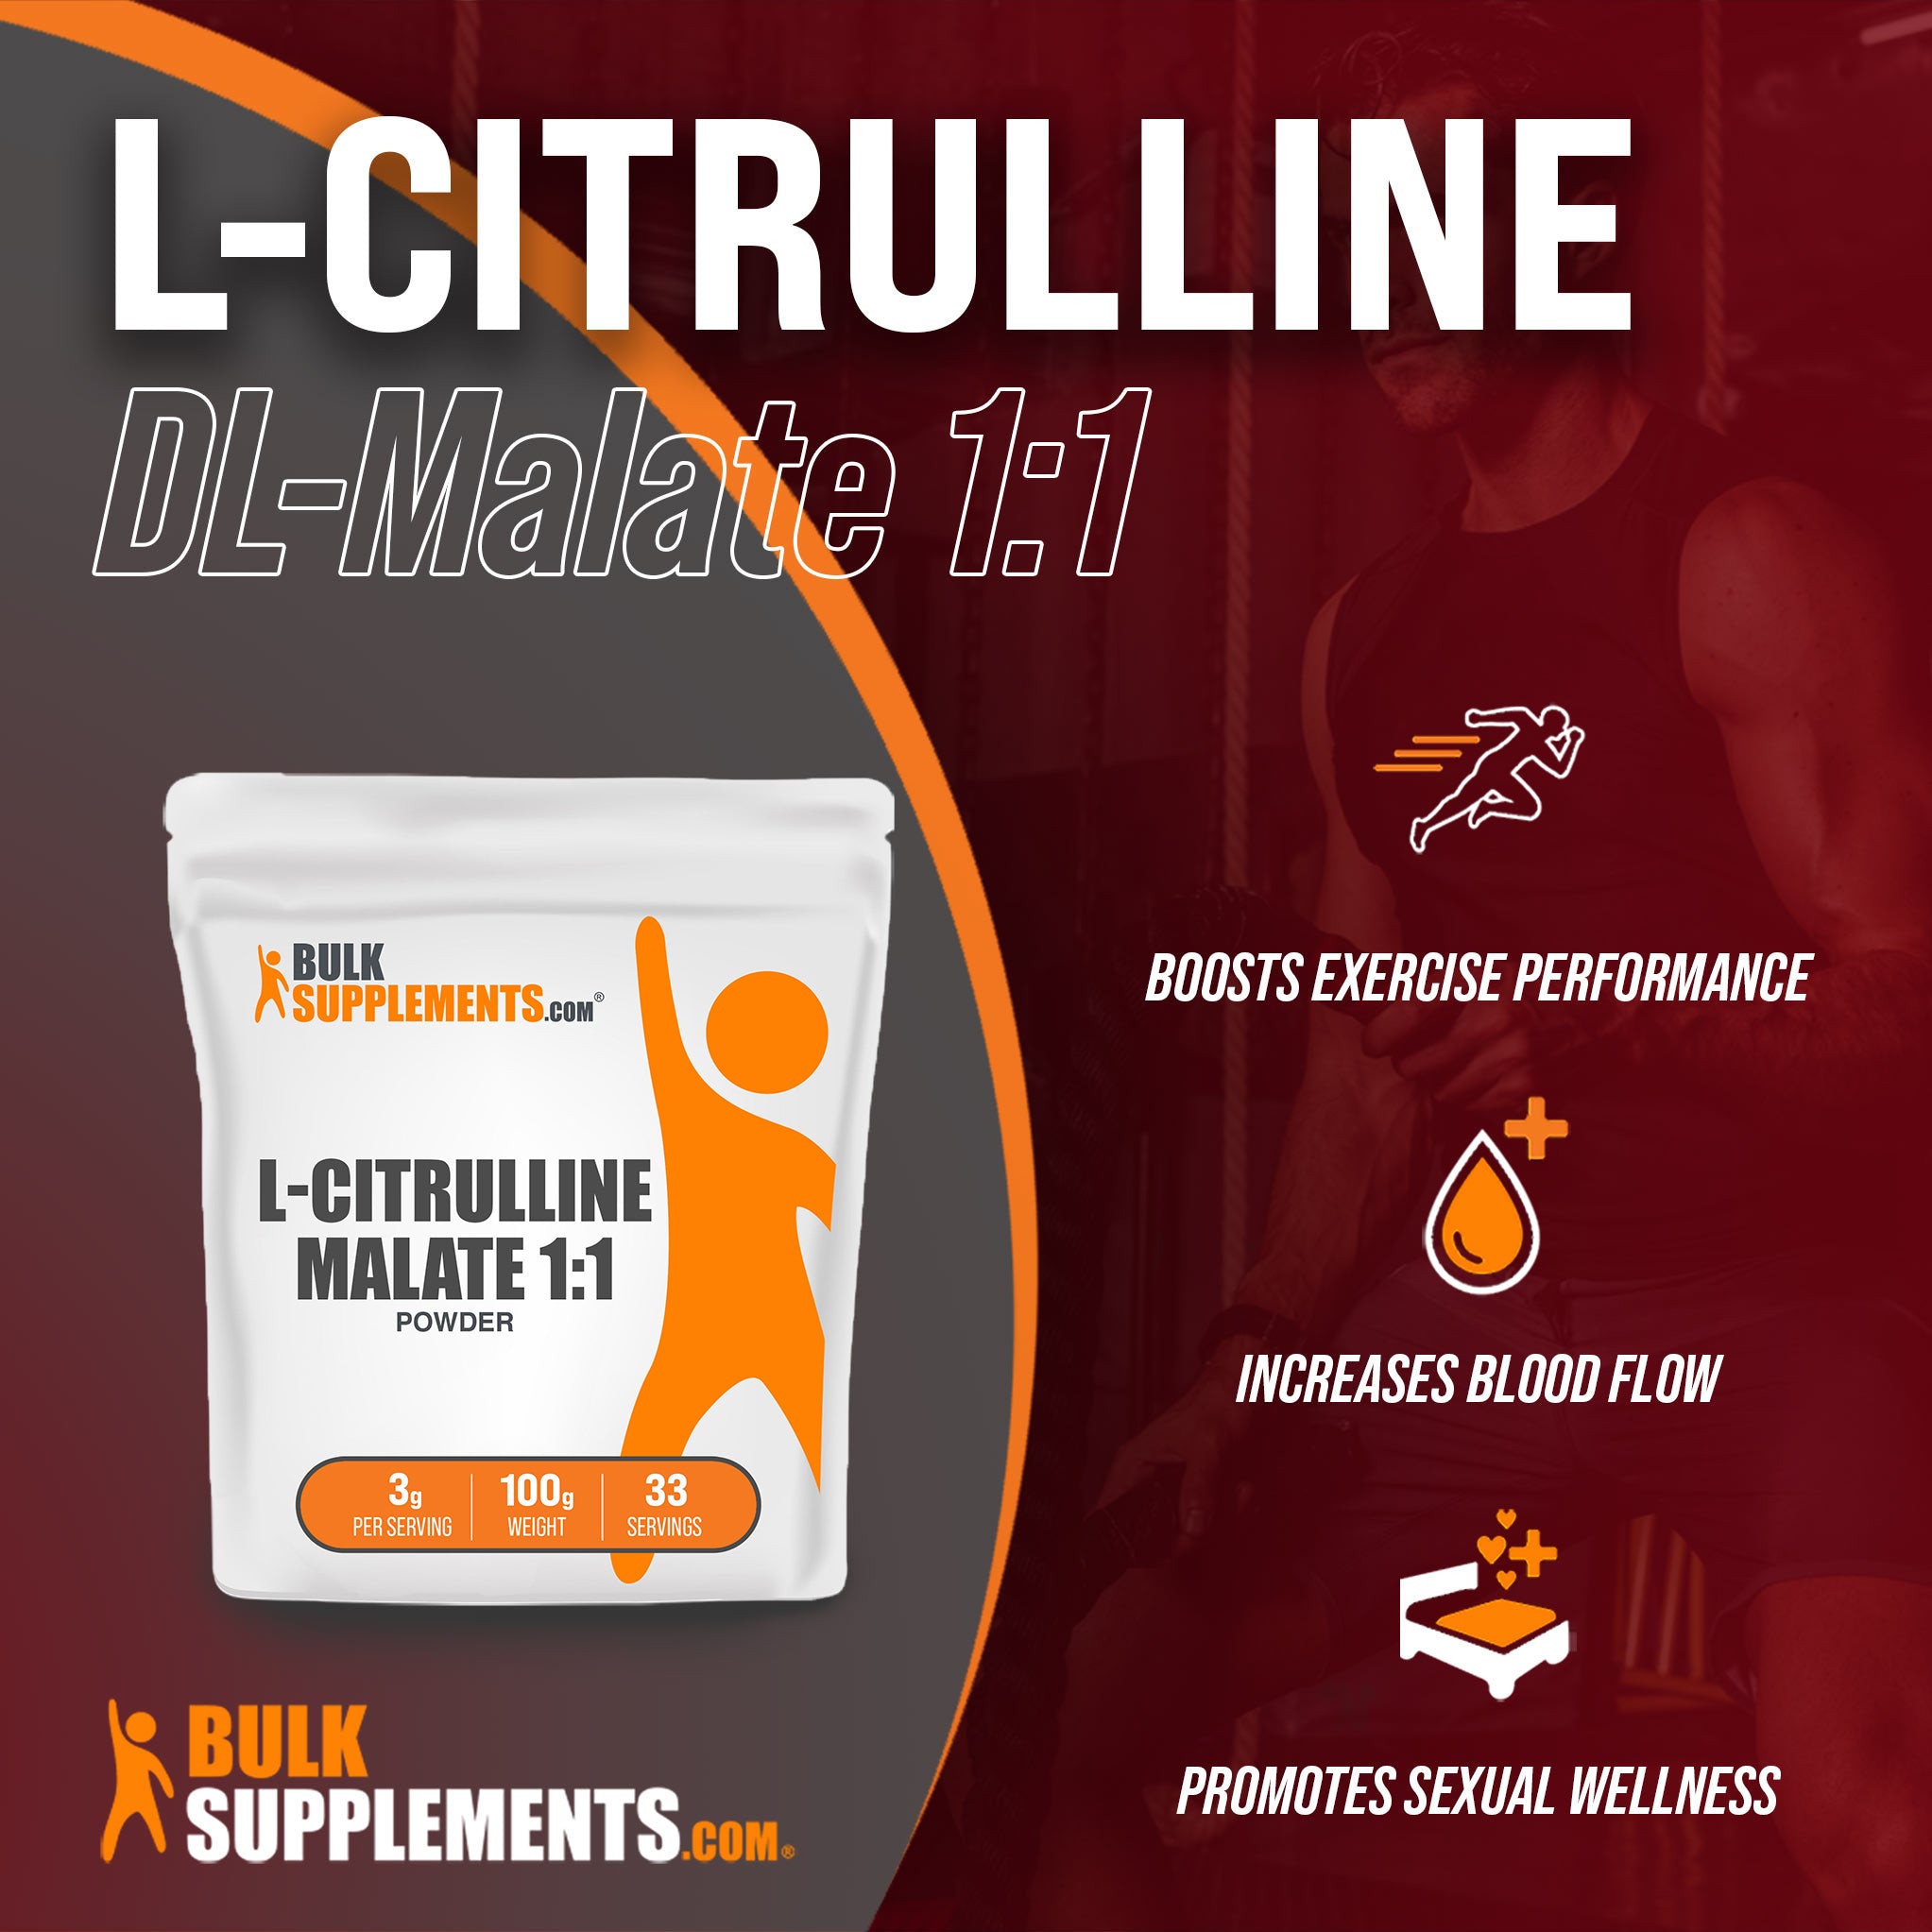 L-Citrulline DL-Malate 1:1 from Bulk Supplements for blood flow and sexual wellness